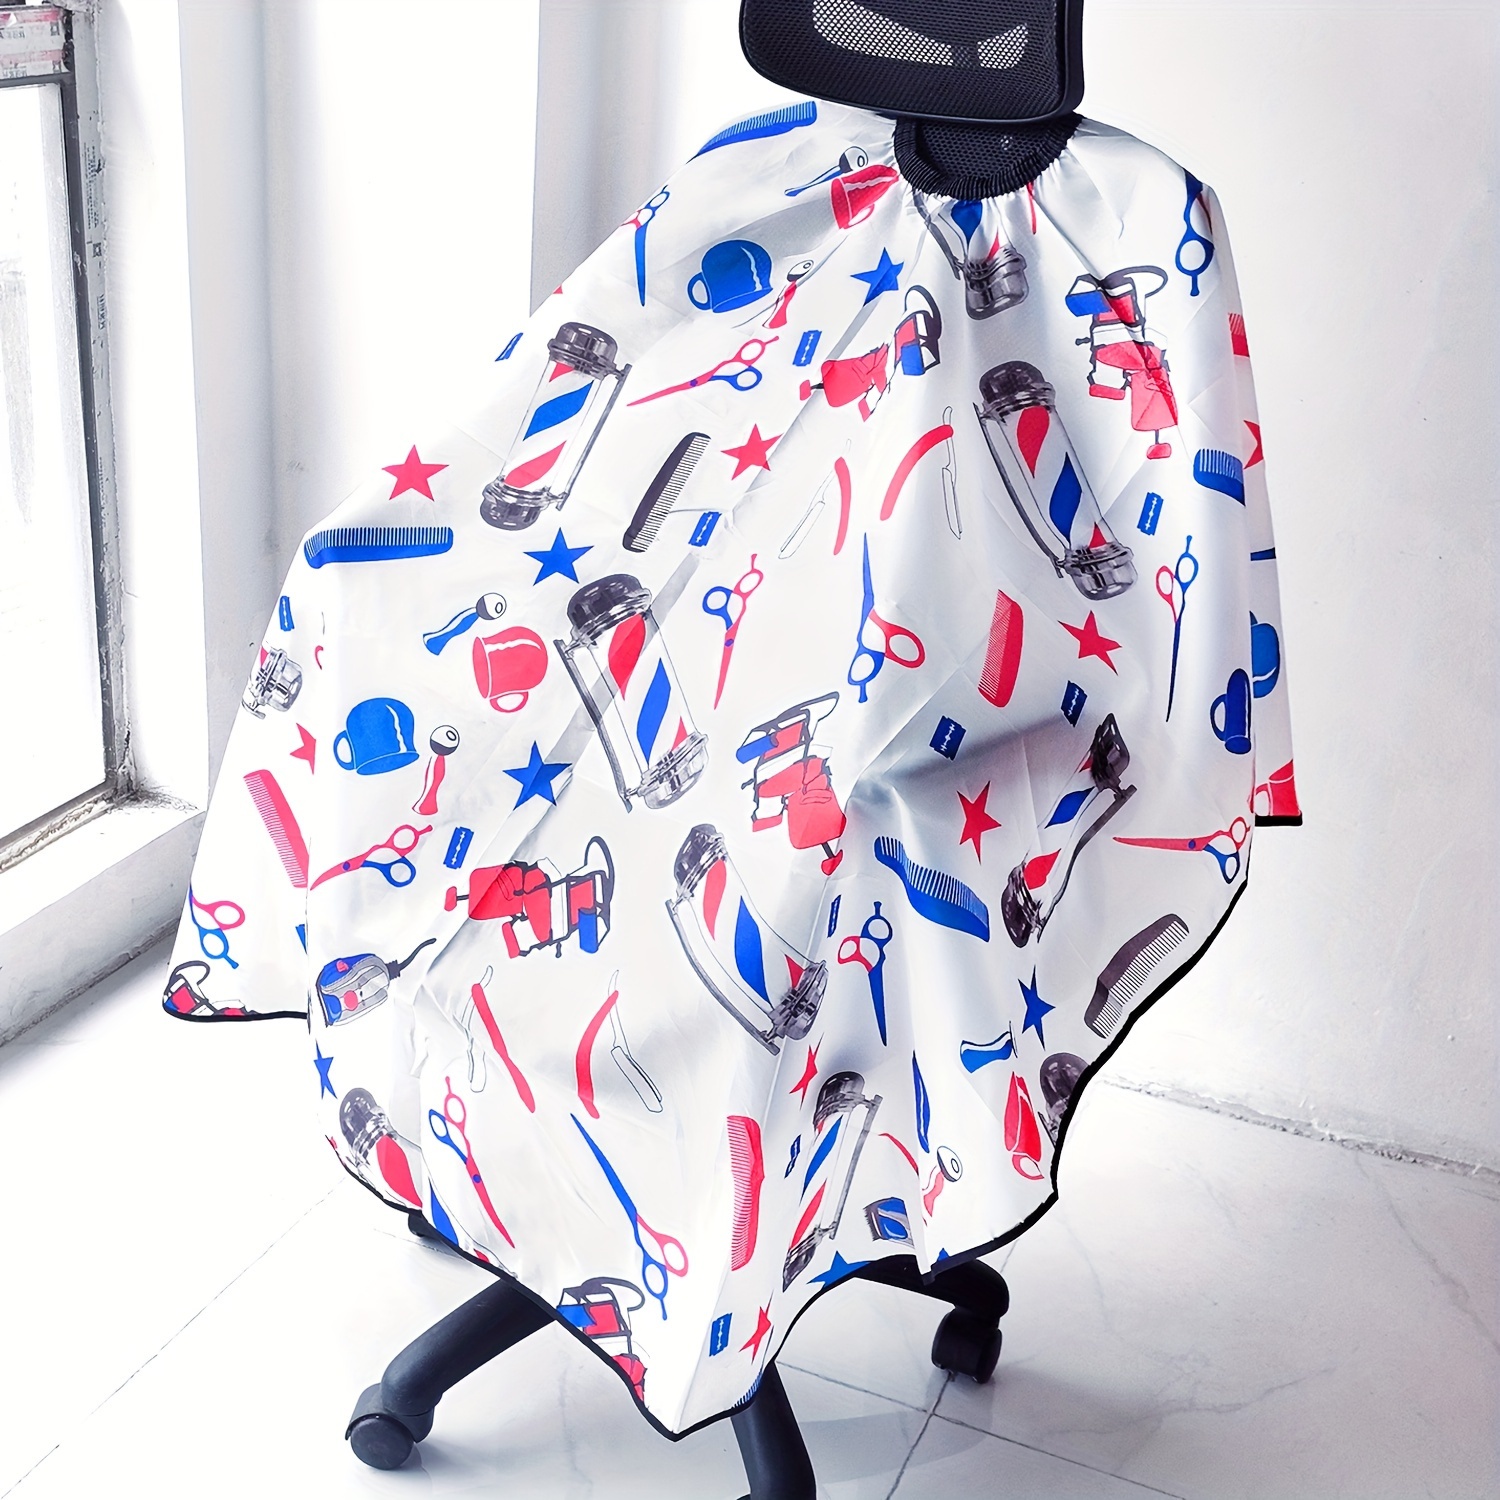 

Professional Barber Cape, Unisex, Non-stick, Anti-static, Haircut Cape With Adjustable Closure, Hair Styling & Coloring Salon Apron With Barber Shop Pattern Design